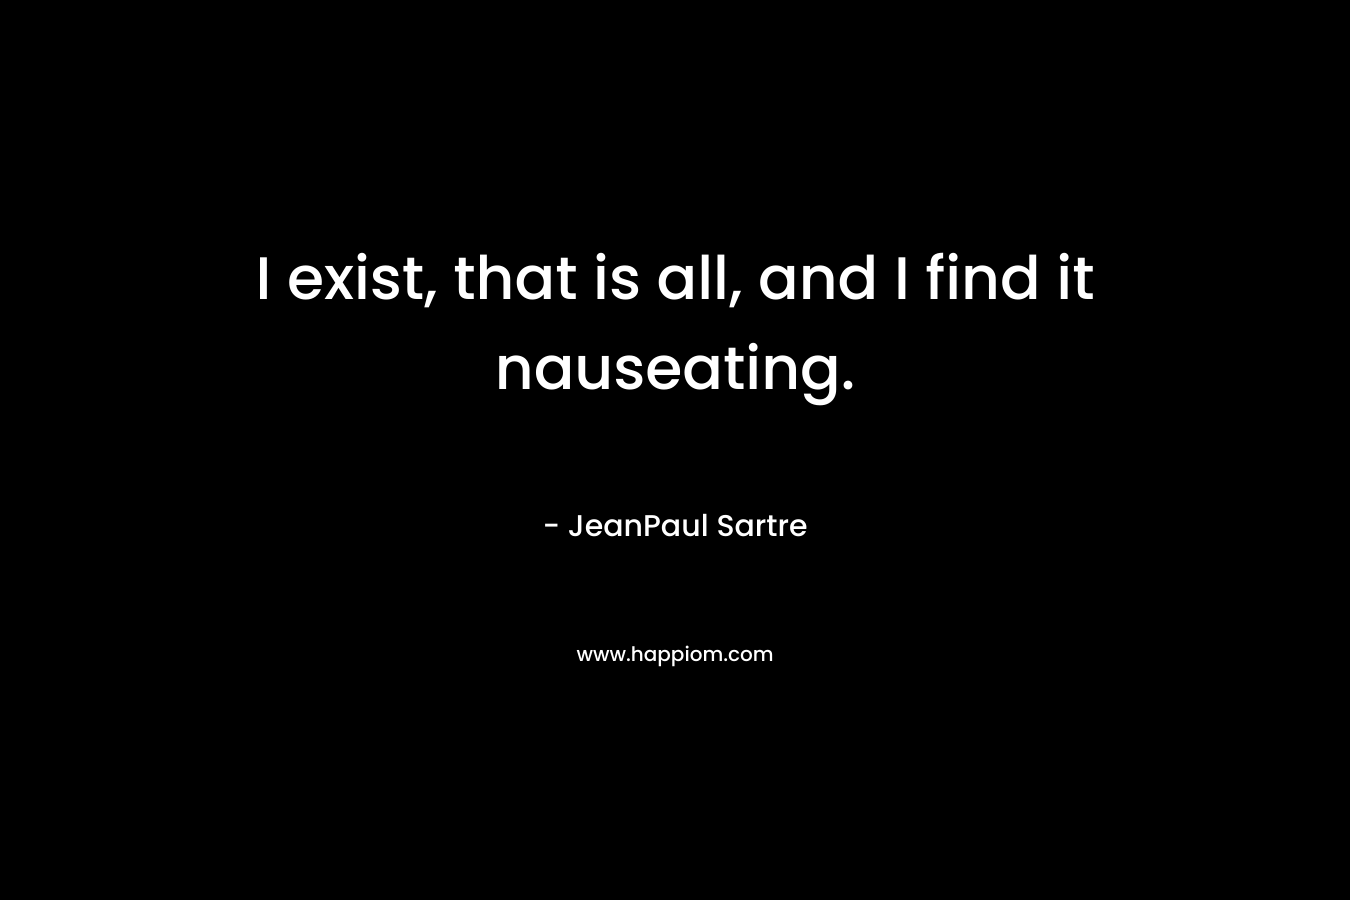 I exist, that is all, and I find it nauseating. – JeanPaul Sartre